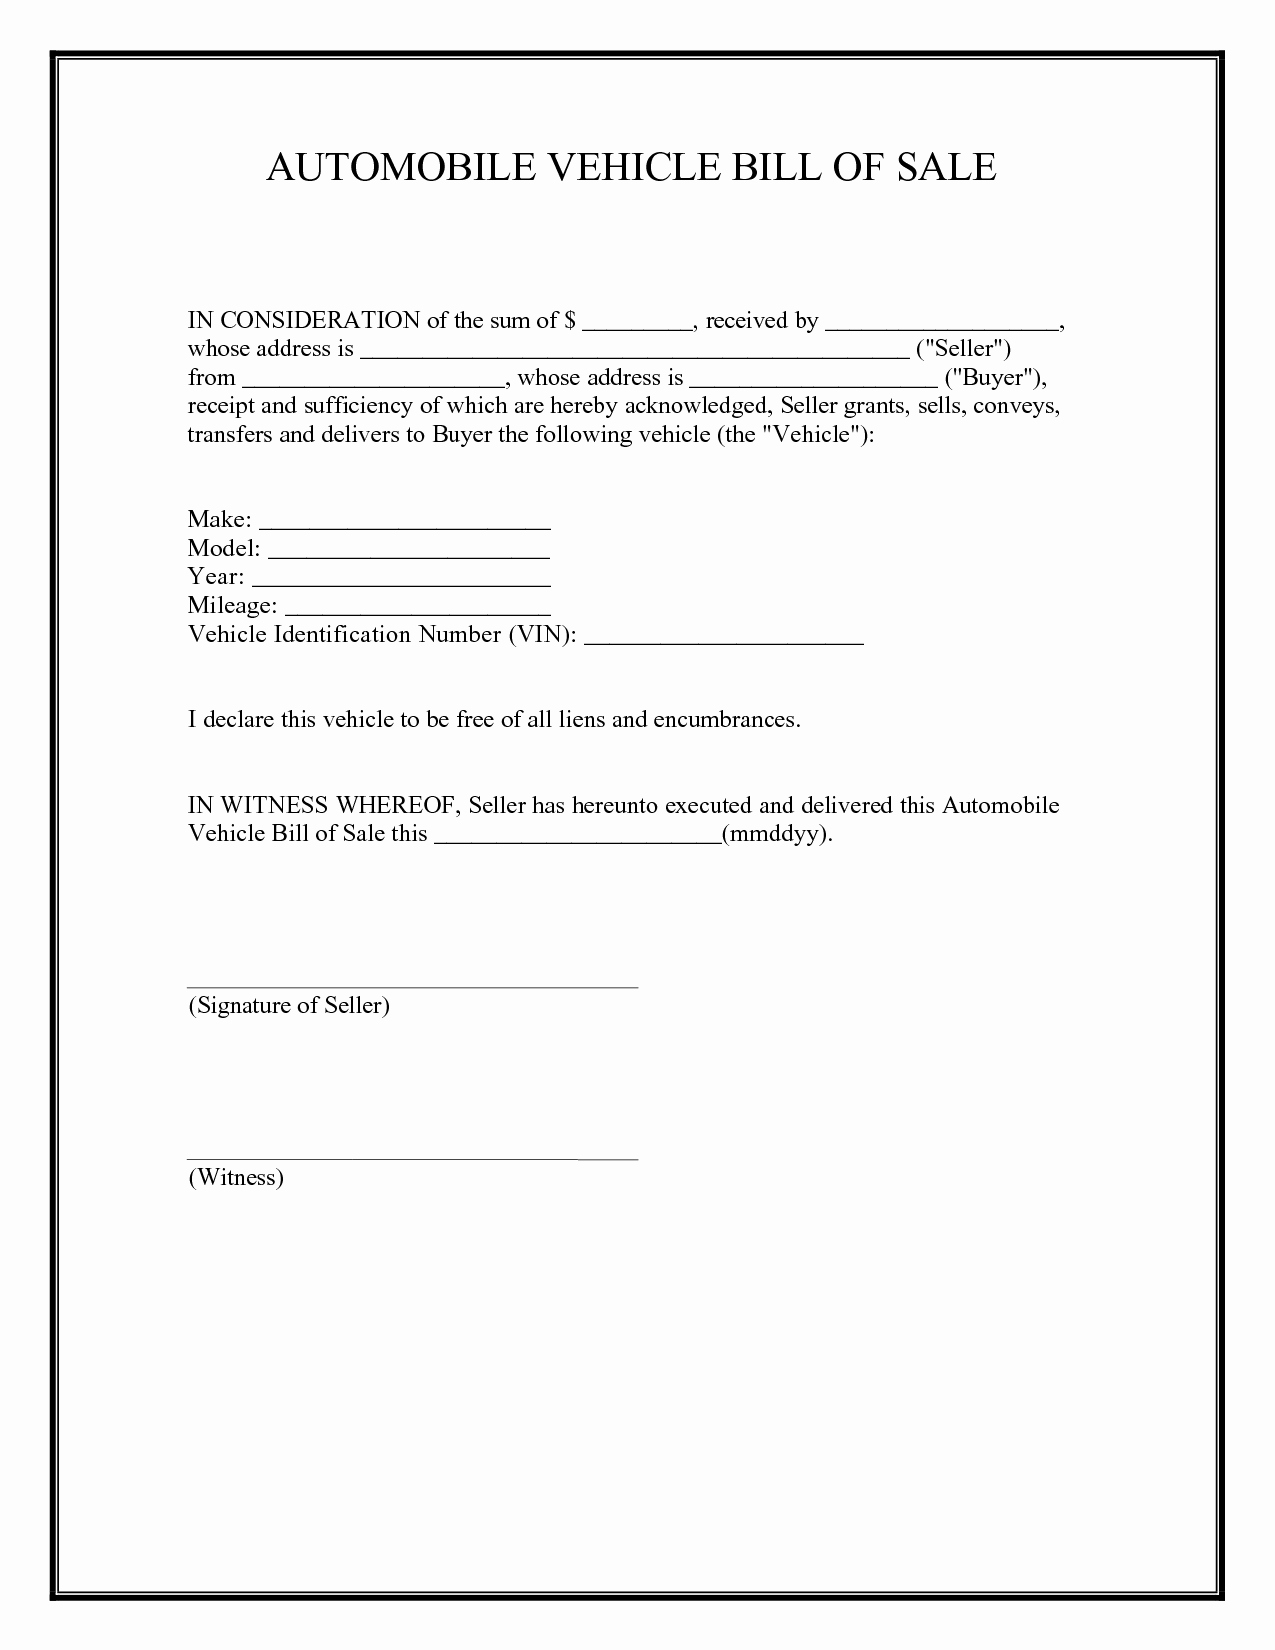 Ga Automobile Bill Of Sale Awesome Vehicle Bill Sale Free Printable Documents